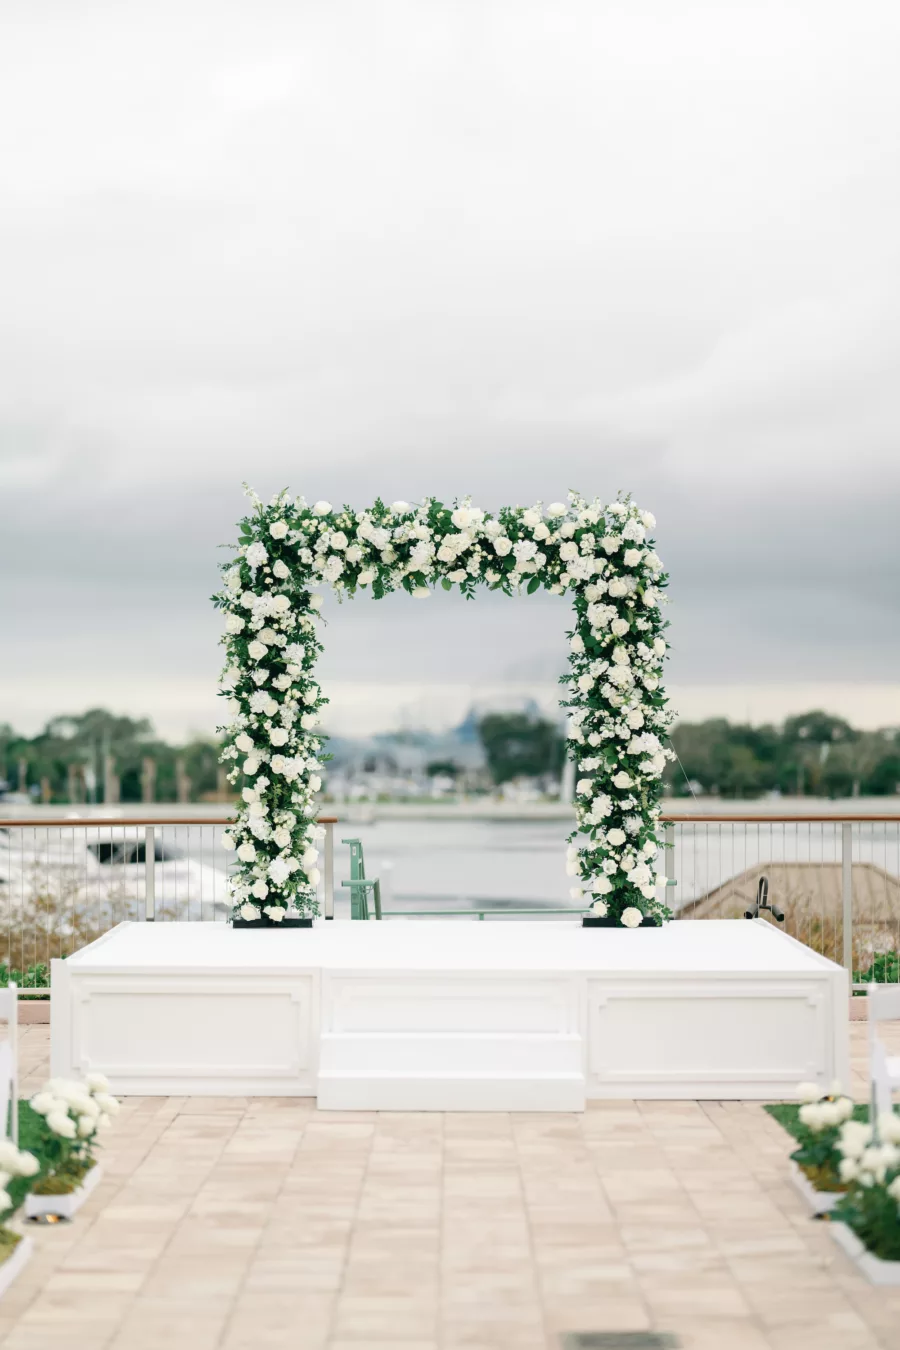 Timeless Outdoor Waterfront Winter Wedding Ceremony with White Rose and Greenery Arch and Stage Inspiration | St Pete Historic Hotel Venue The Vinoy